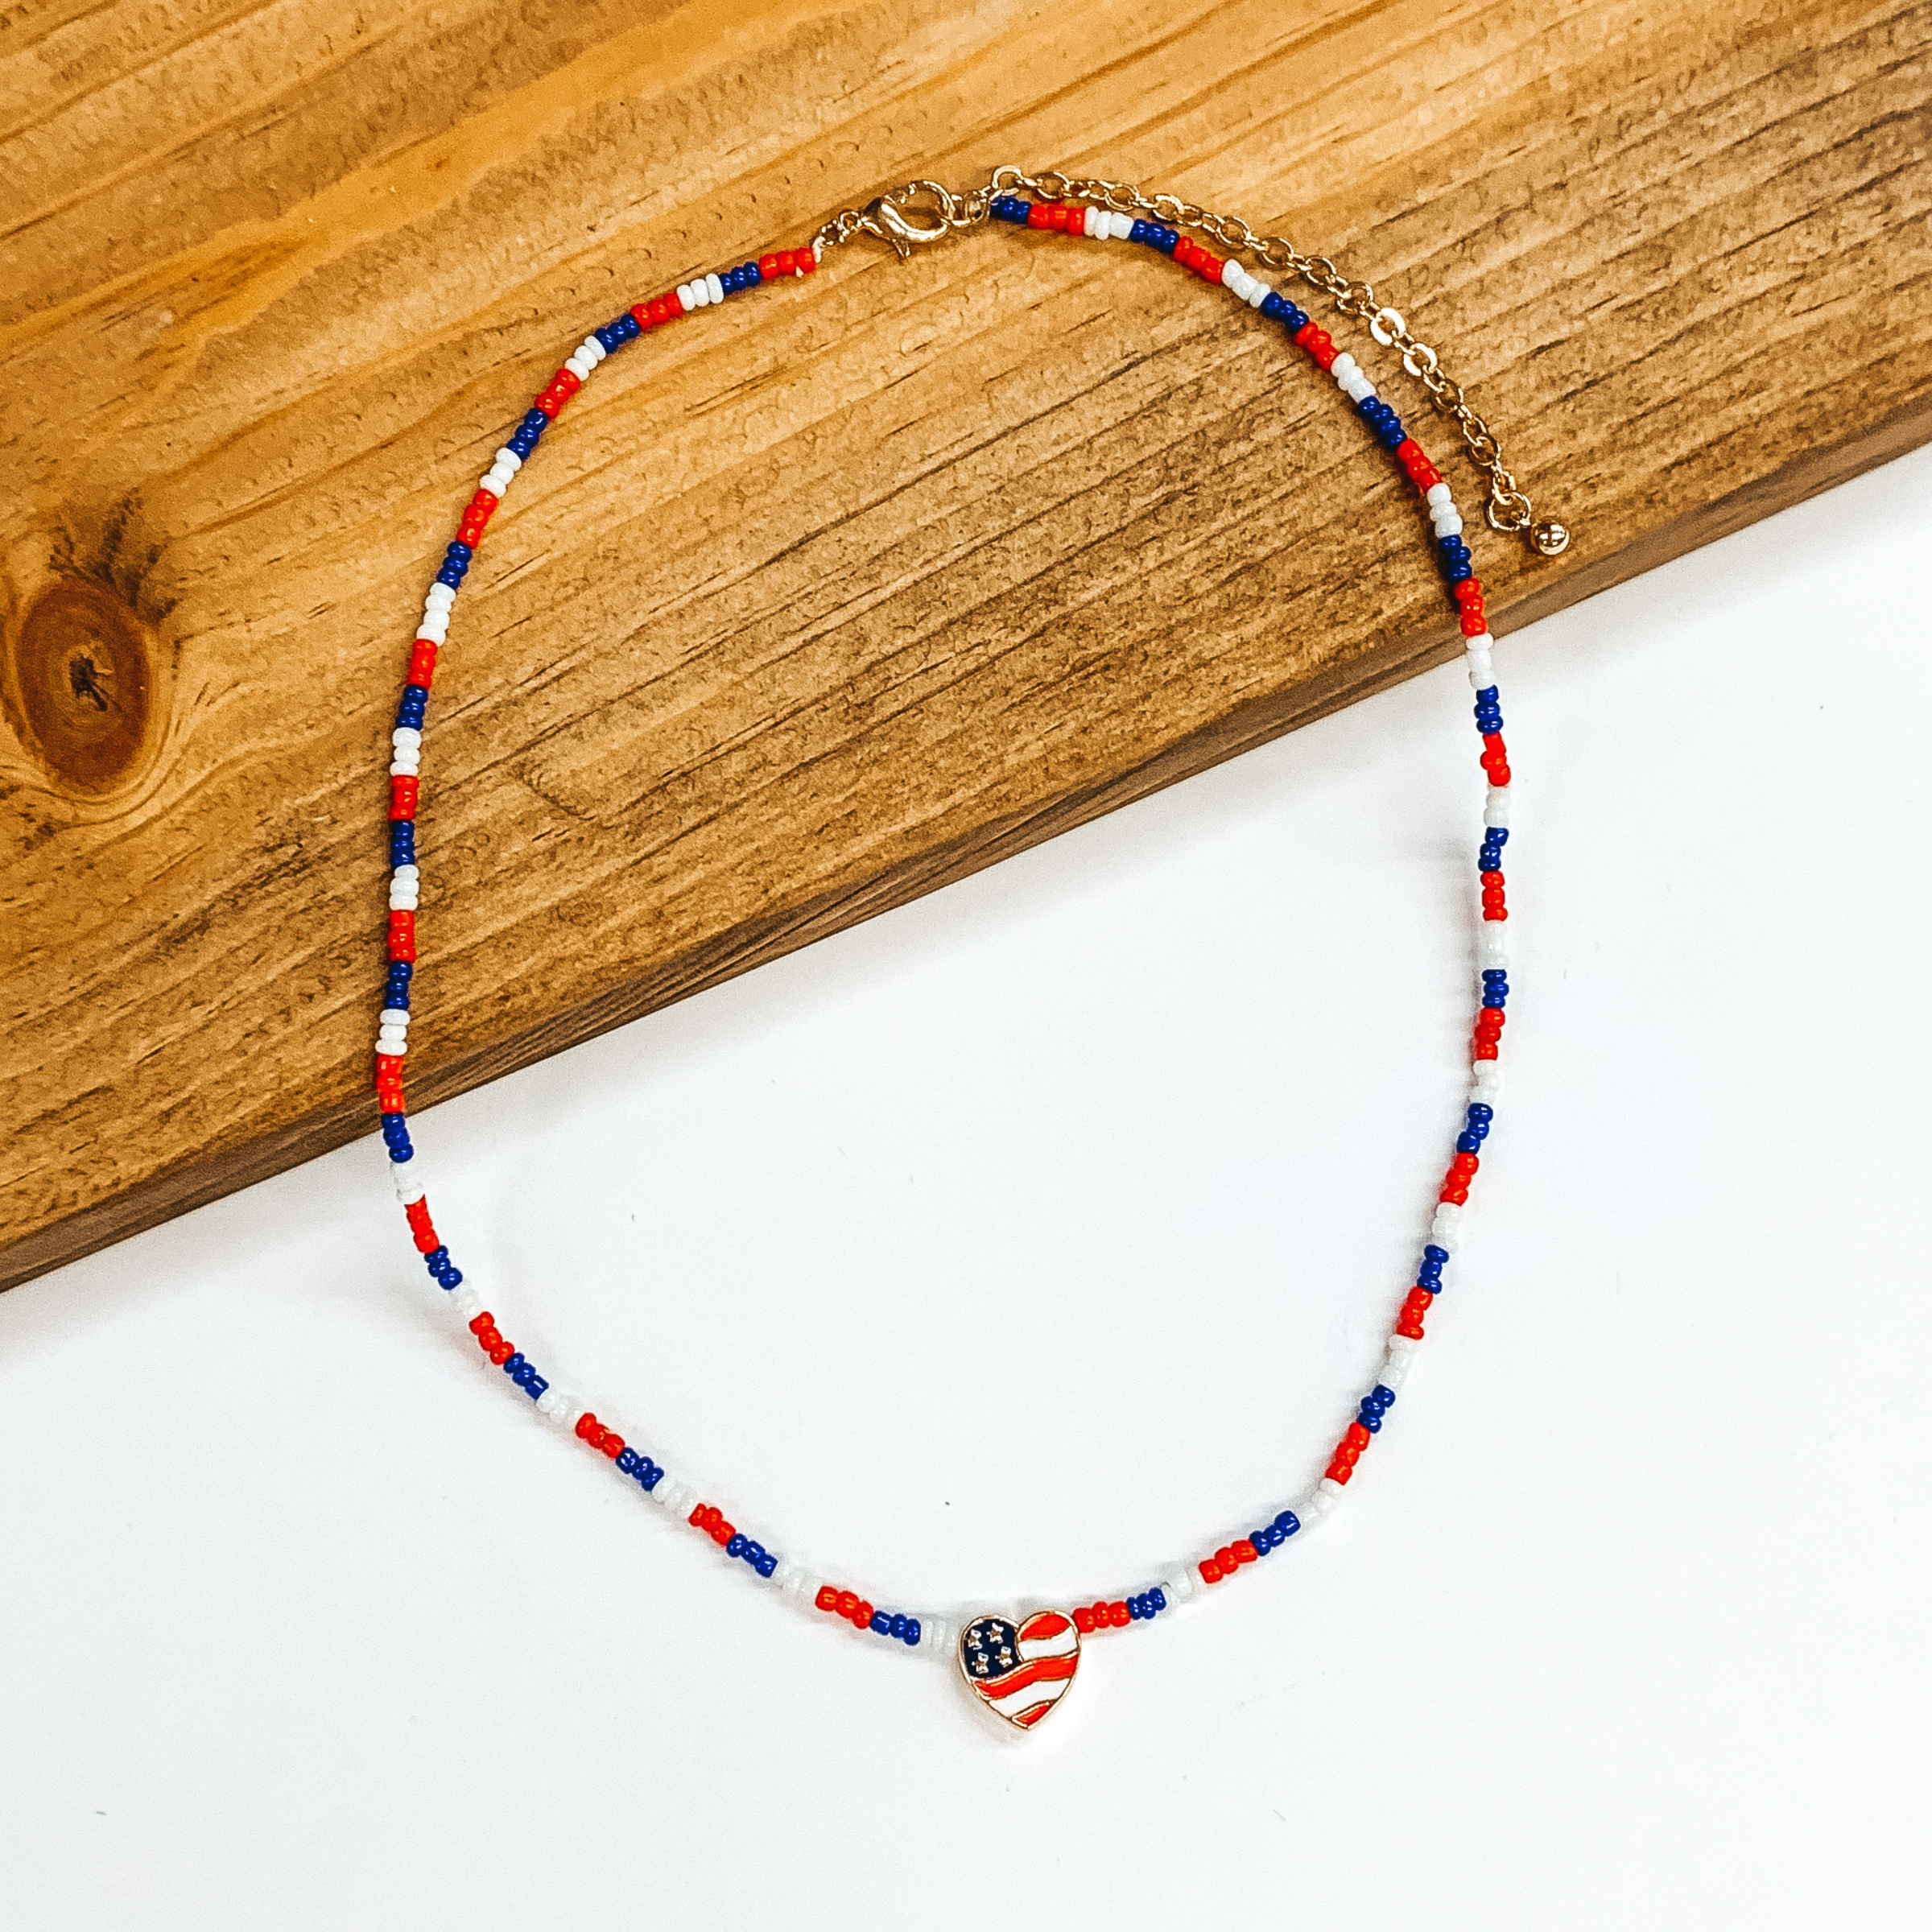 Beaded Necklace in White, Blue, Red with Heart Flag Charm - Giddy Up Glamour Boutique